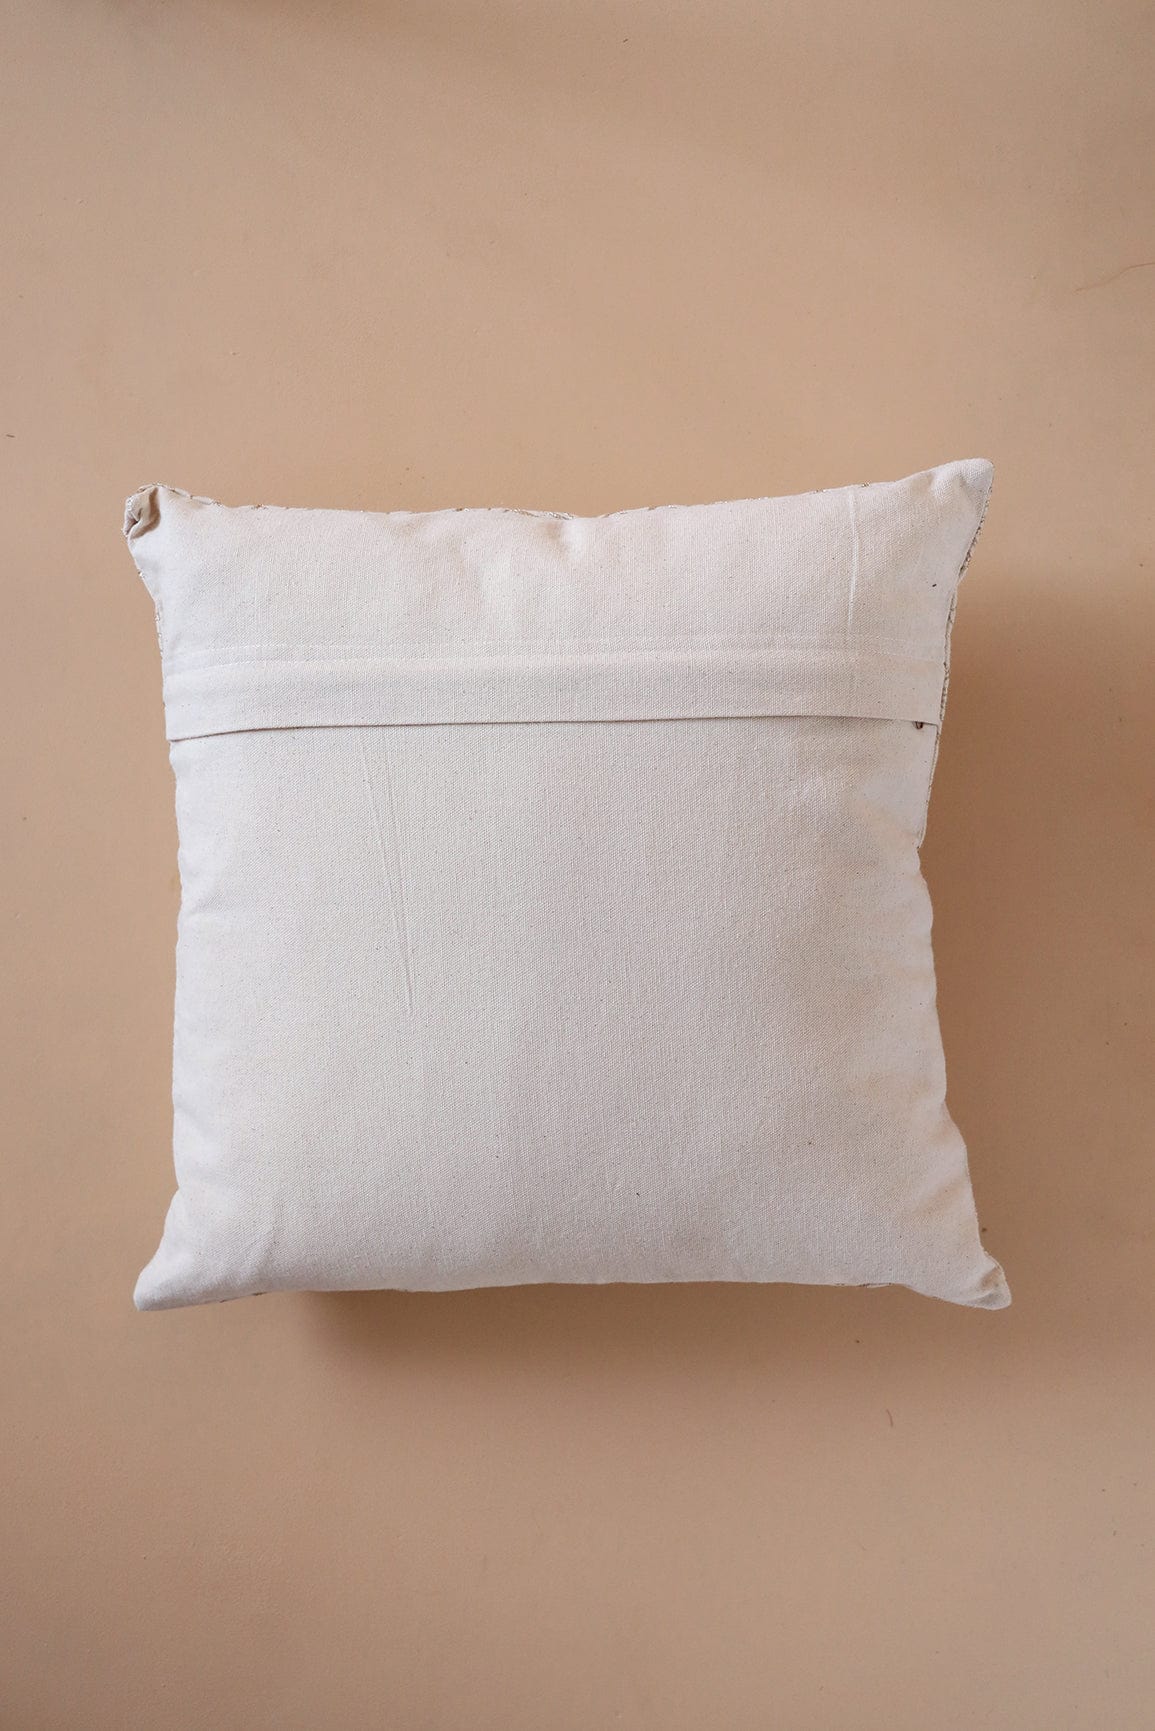 doeraa Modern Concept Beige Embroidery on Off White cotton Cushion Cover (16*16 inches)